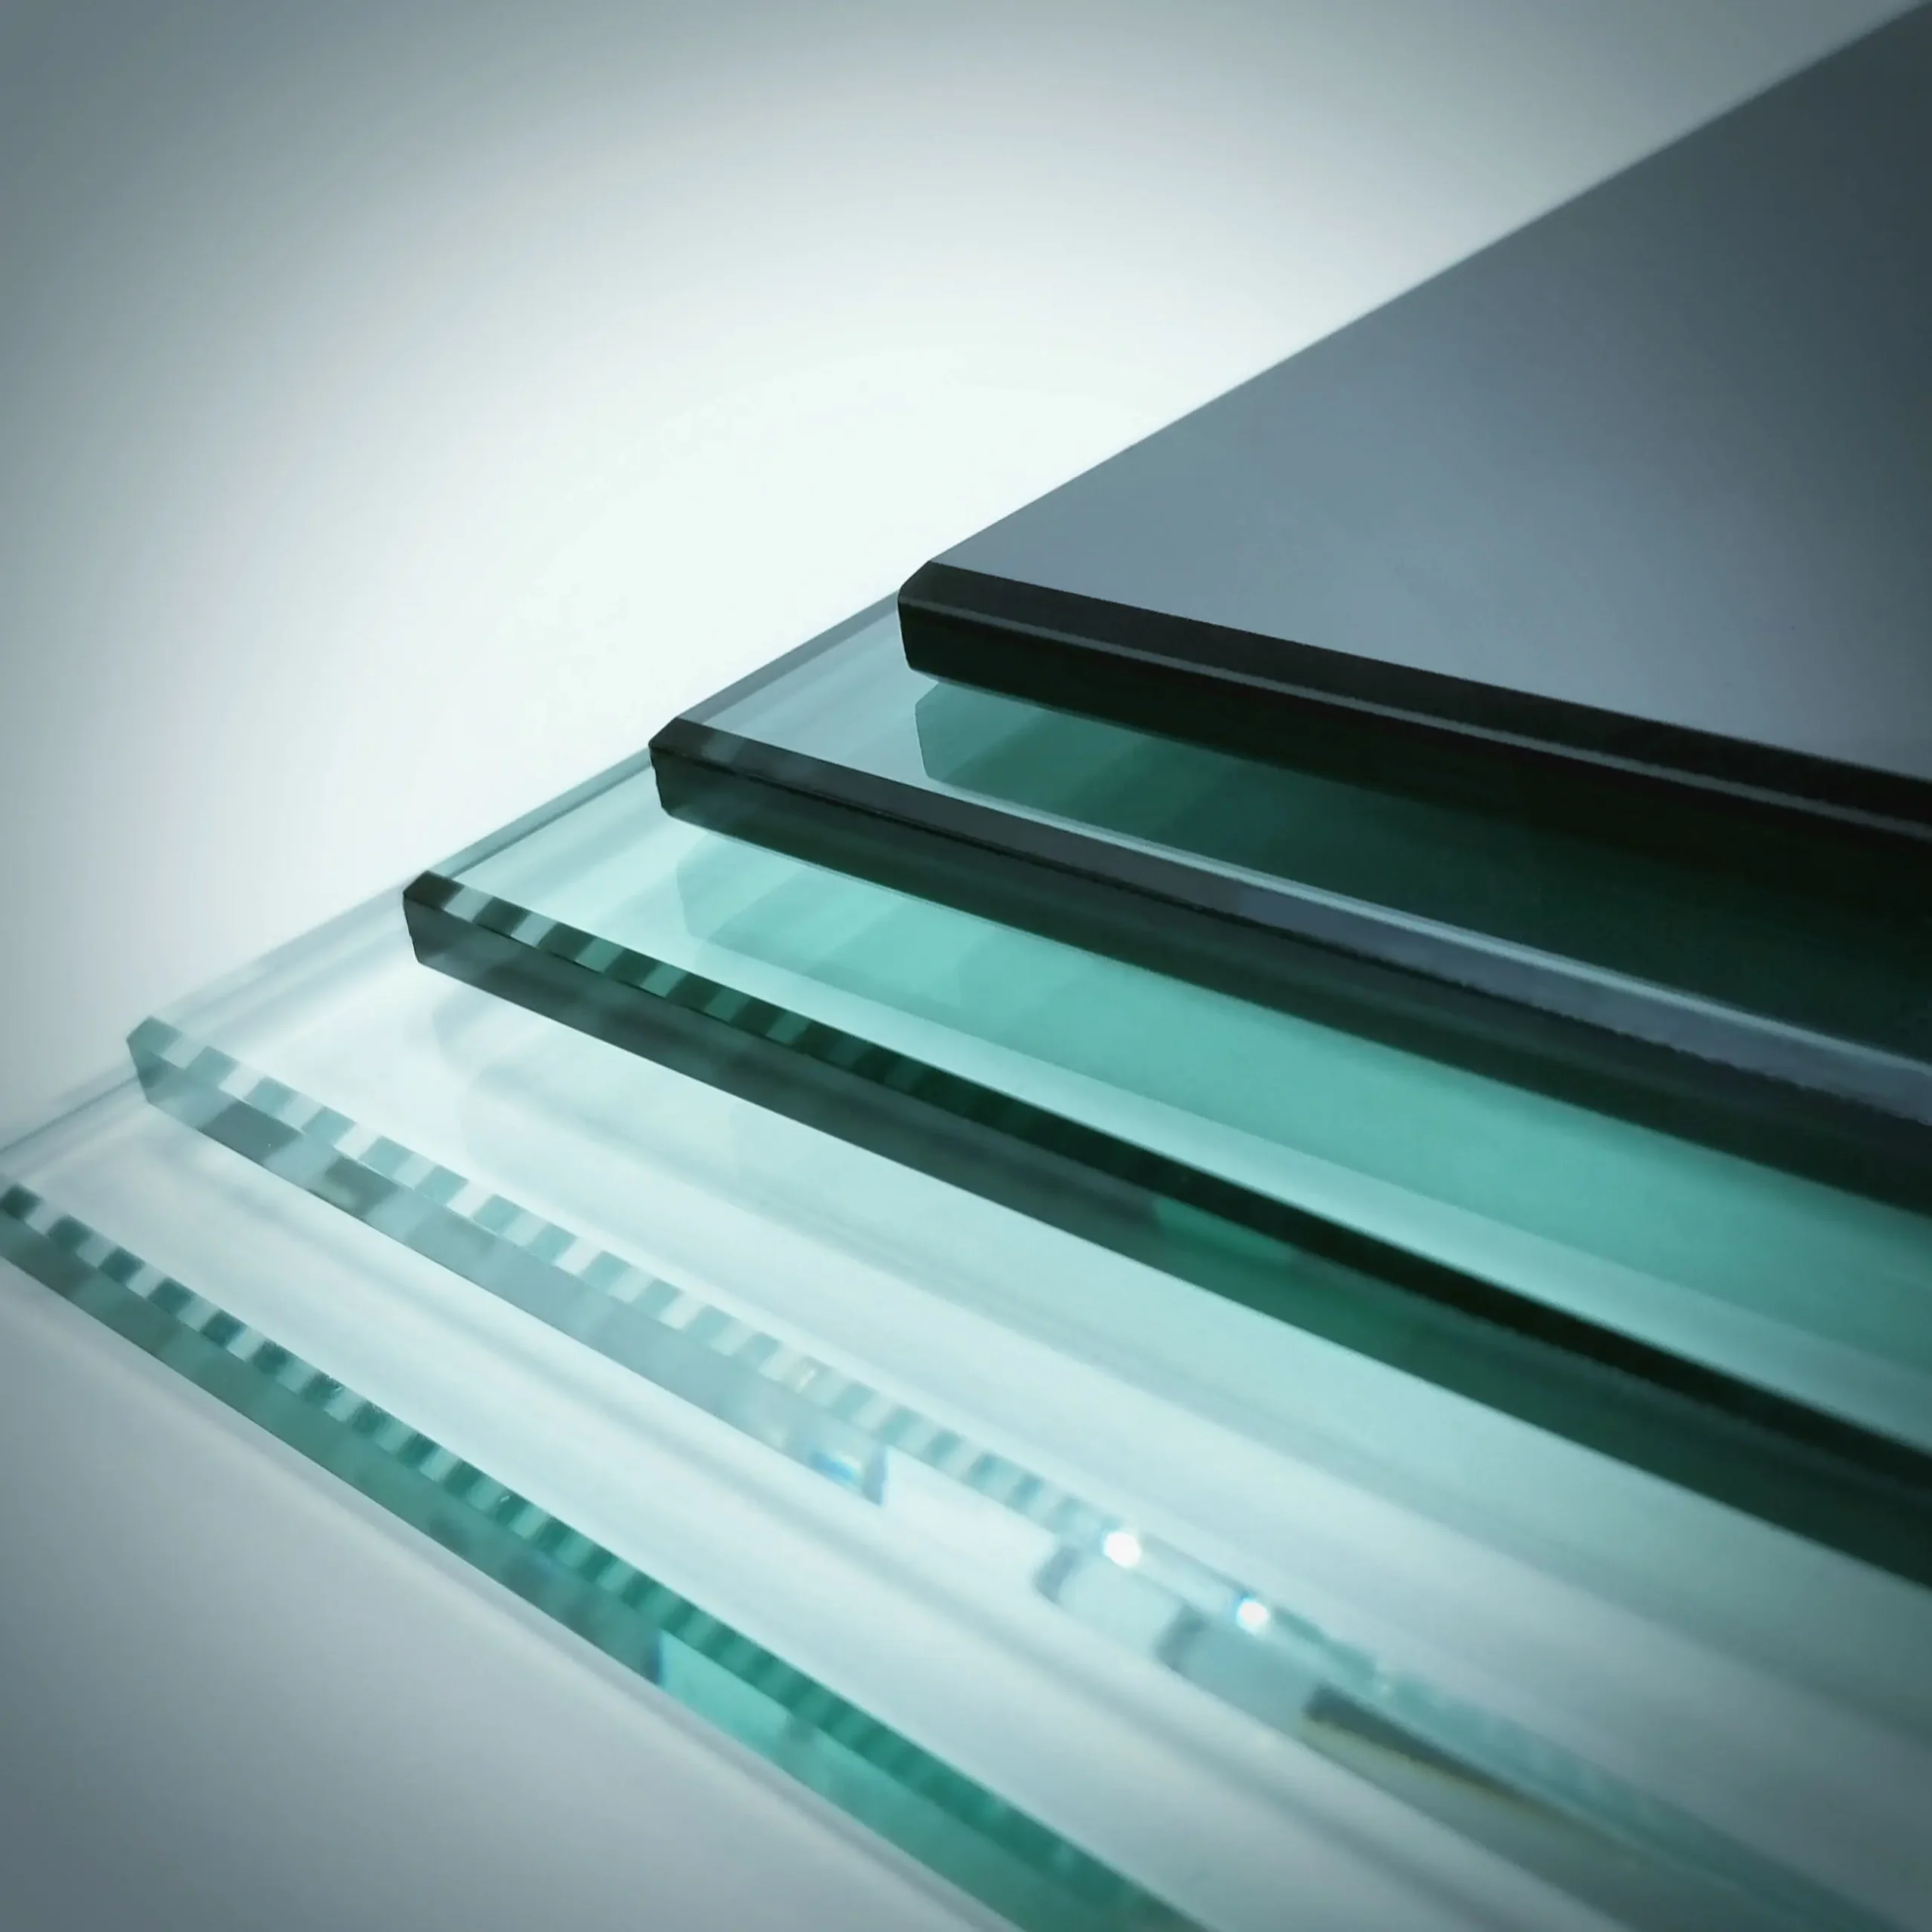 smoked glass price - What is the cost of laminated glass